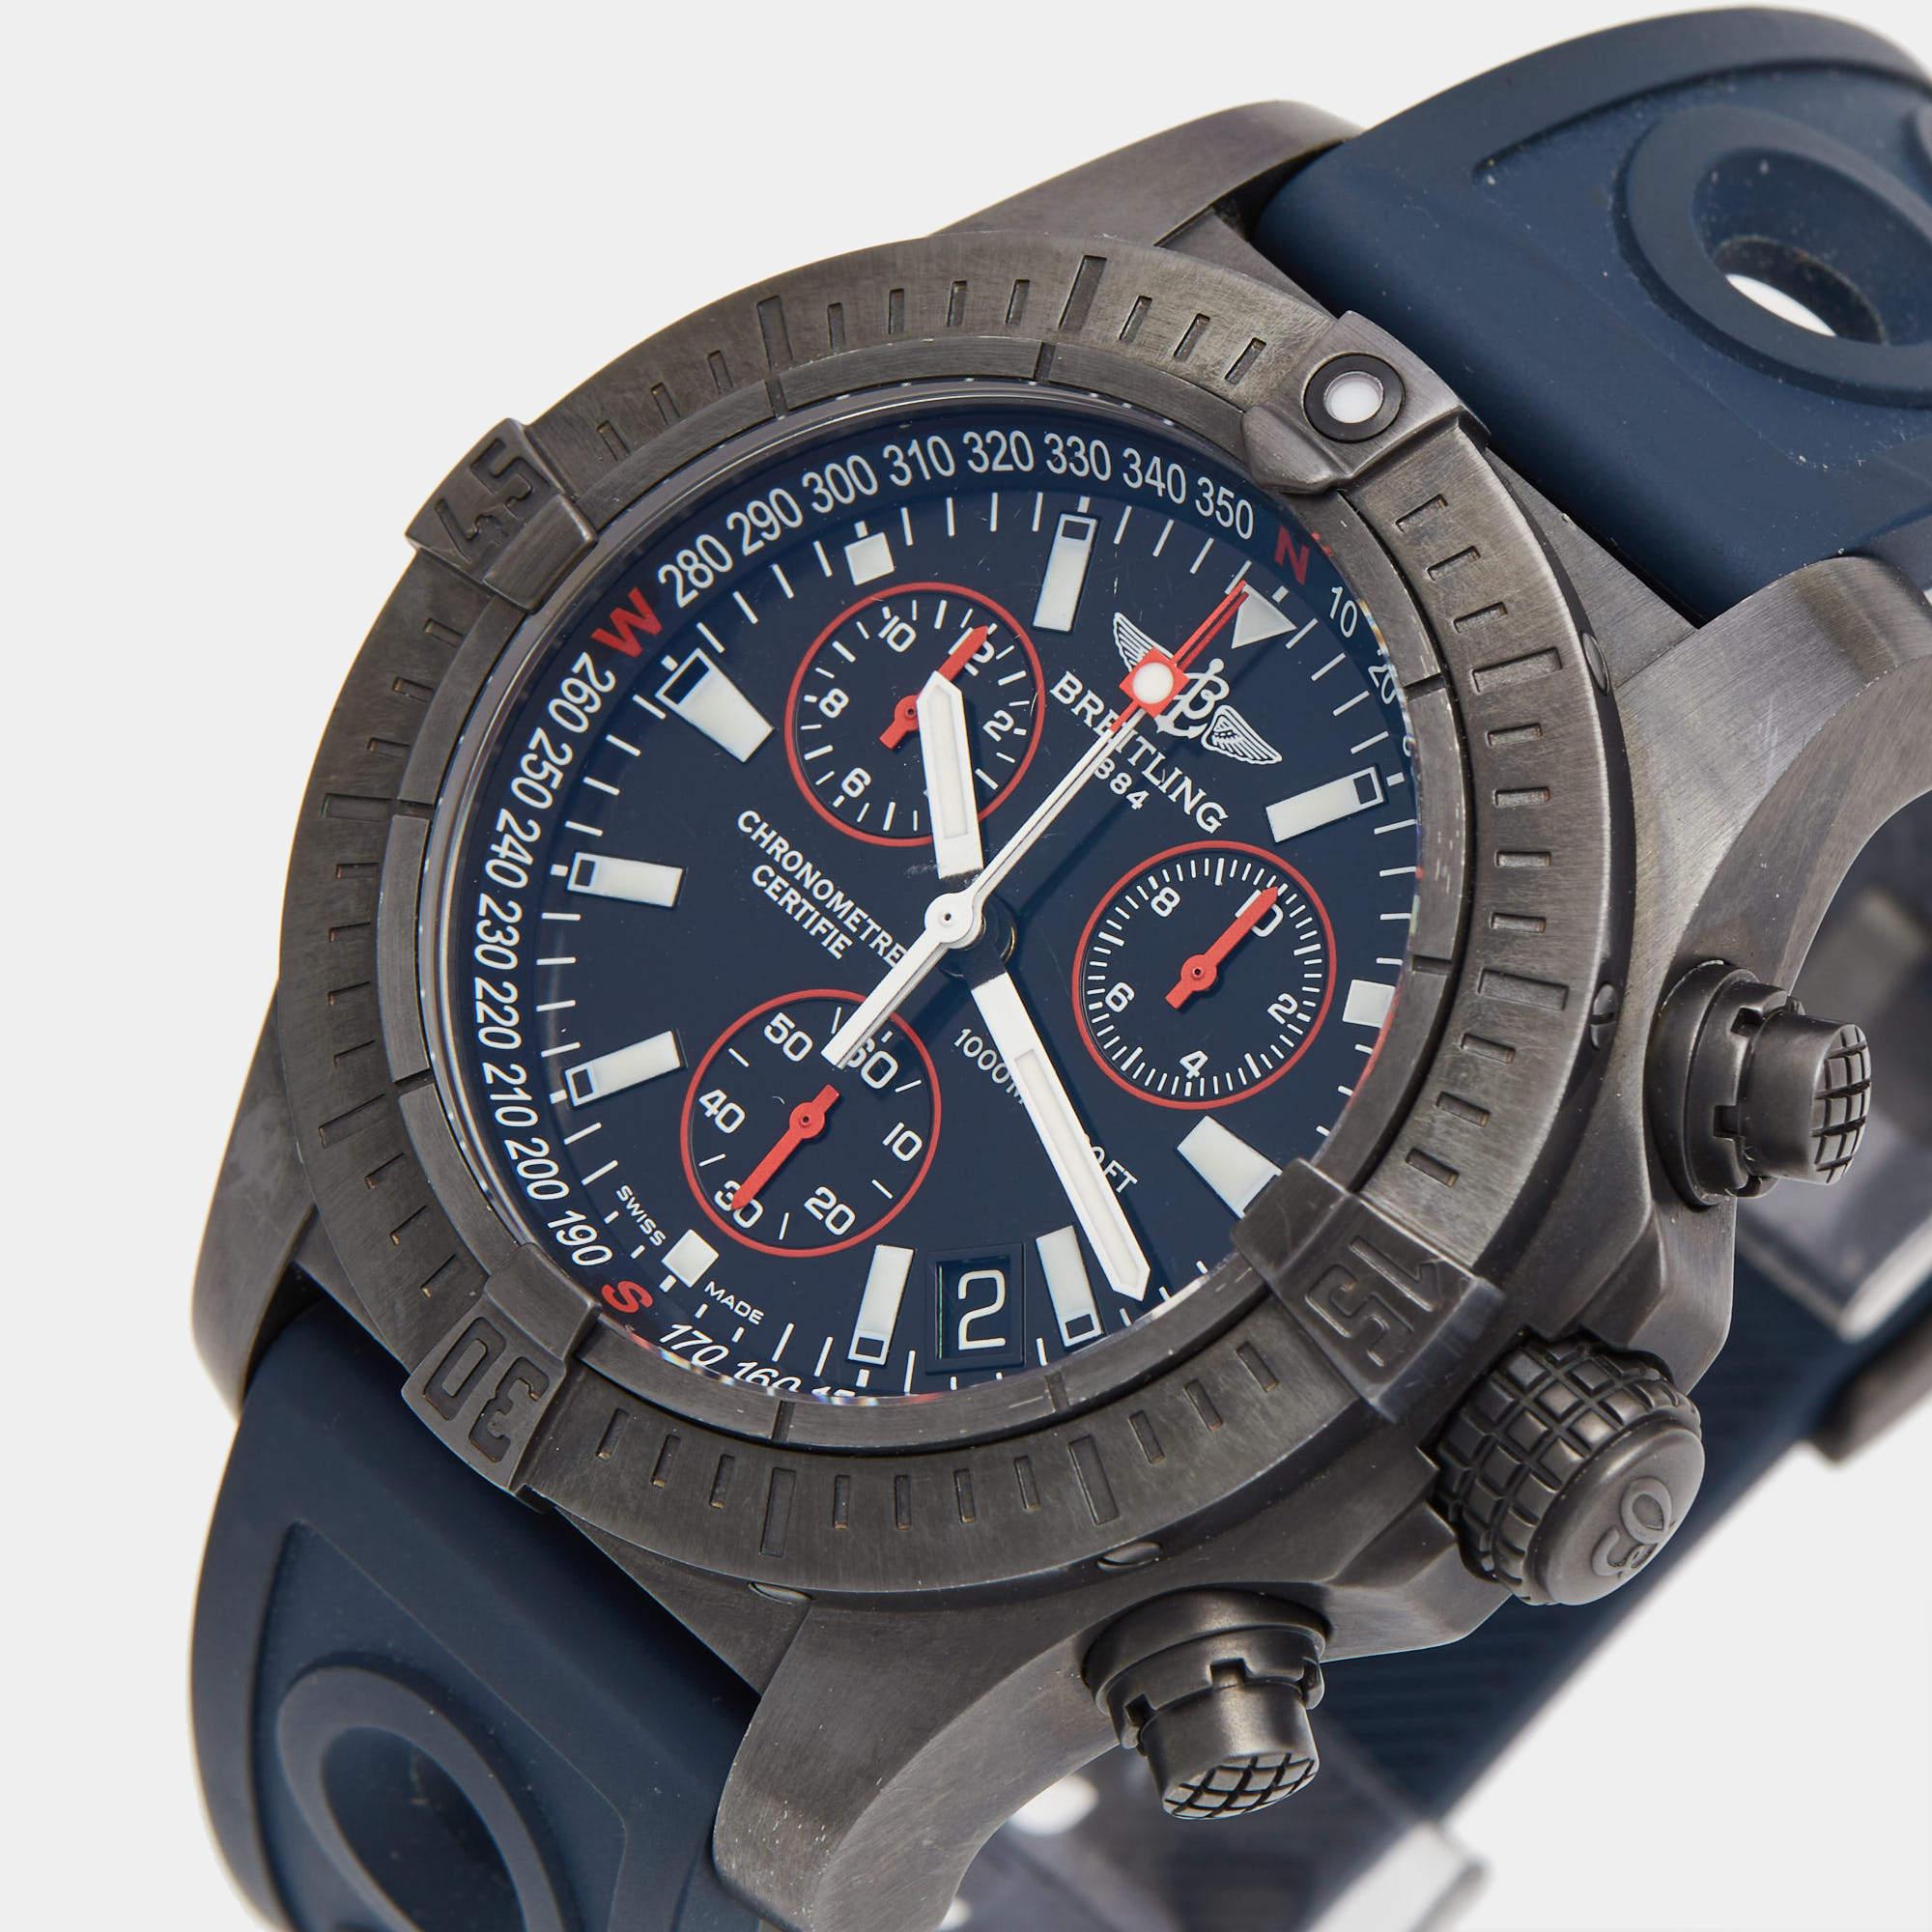 Incorporate Breitling's sophisticated style into your ensemble with this exquisite Avenger Seawolf Chrono 